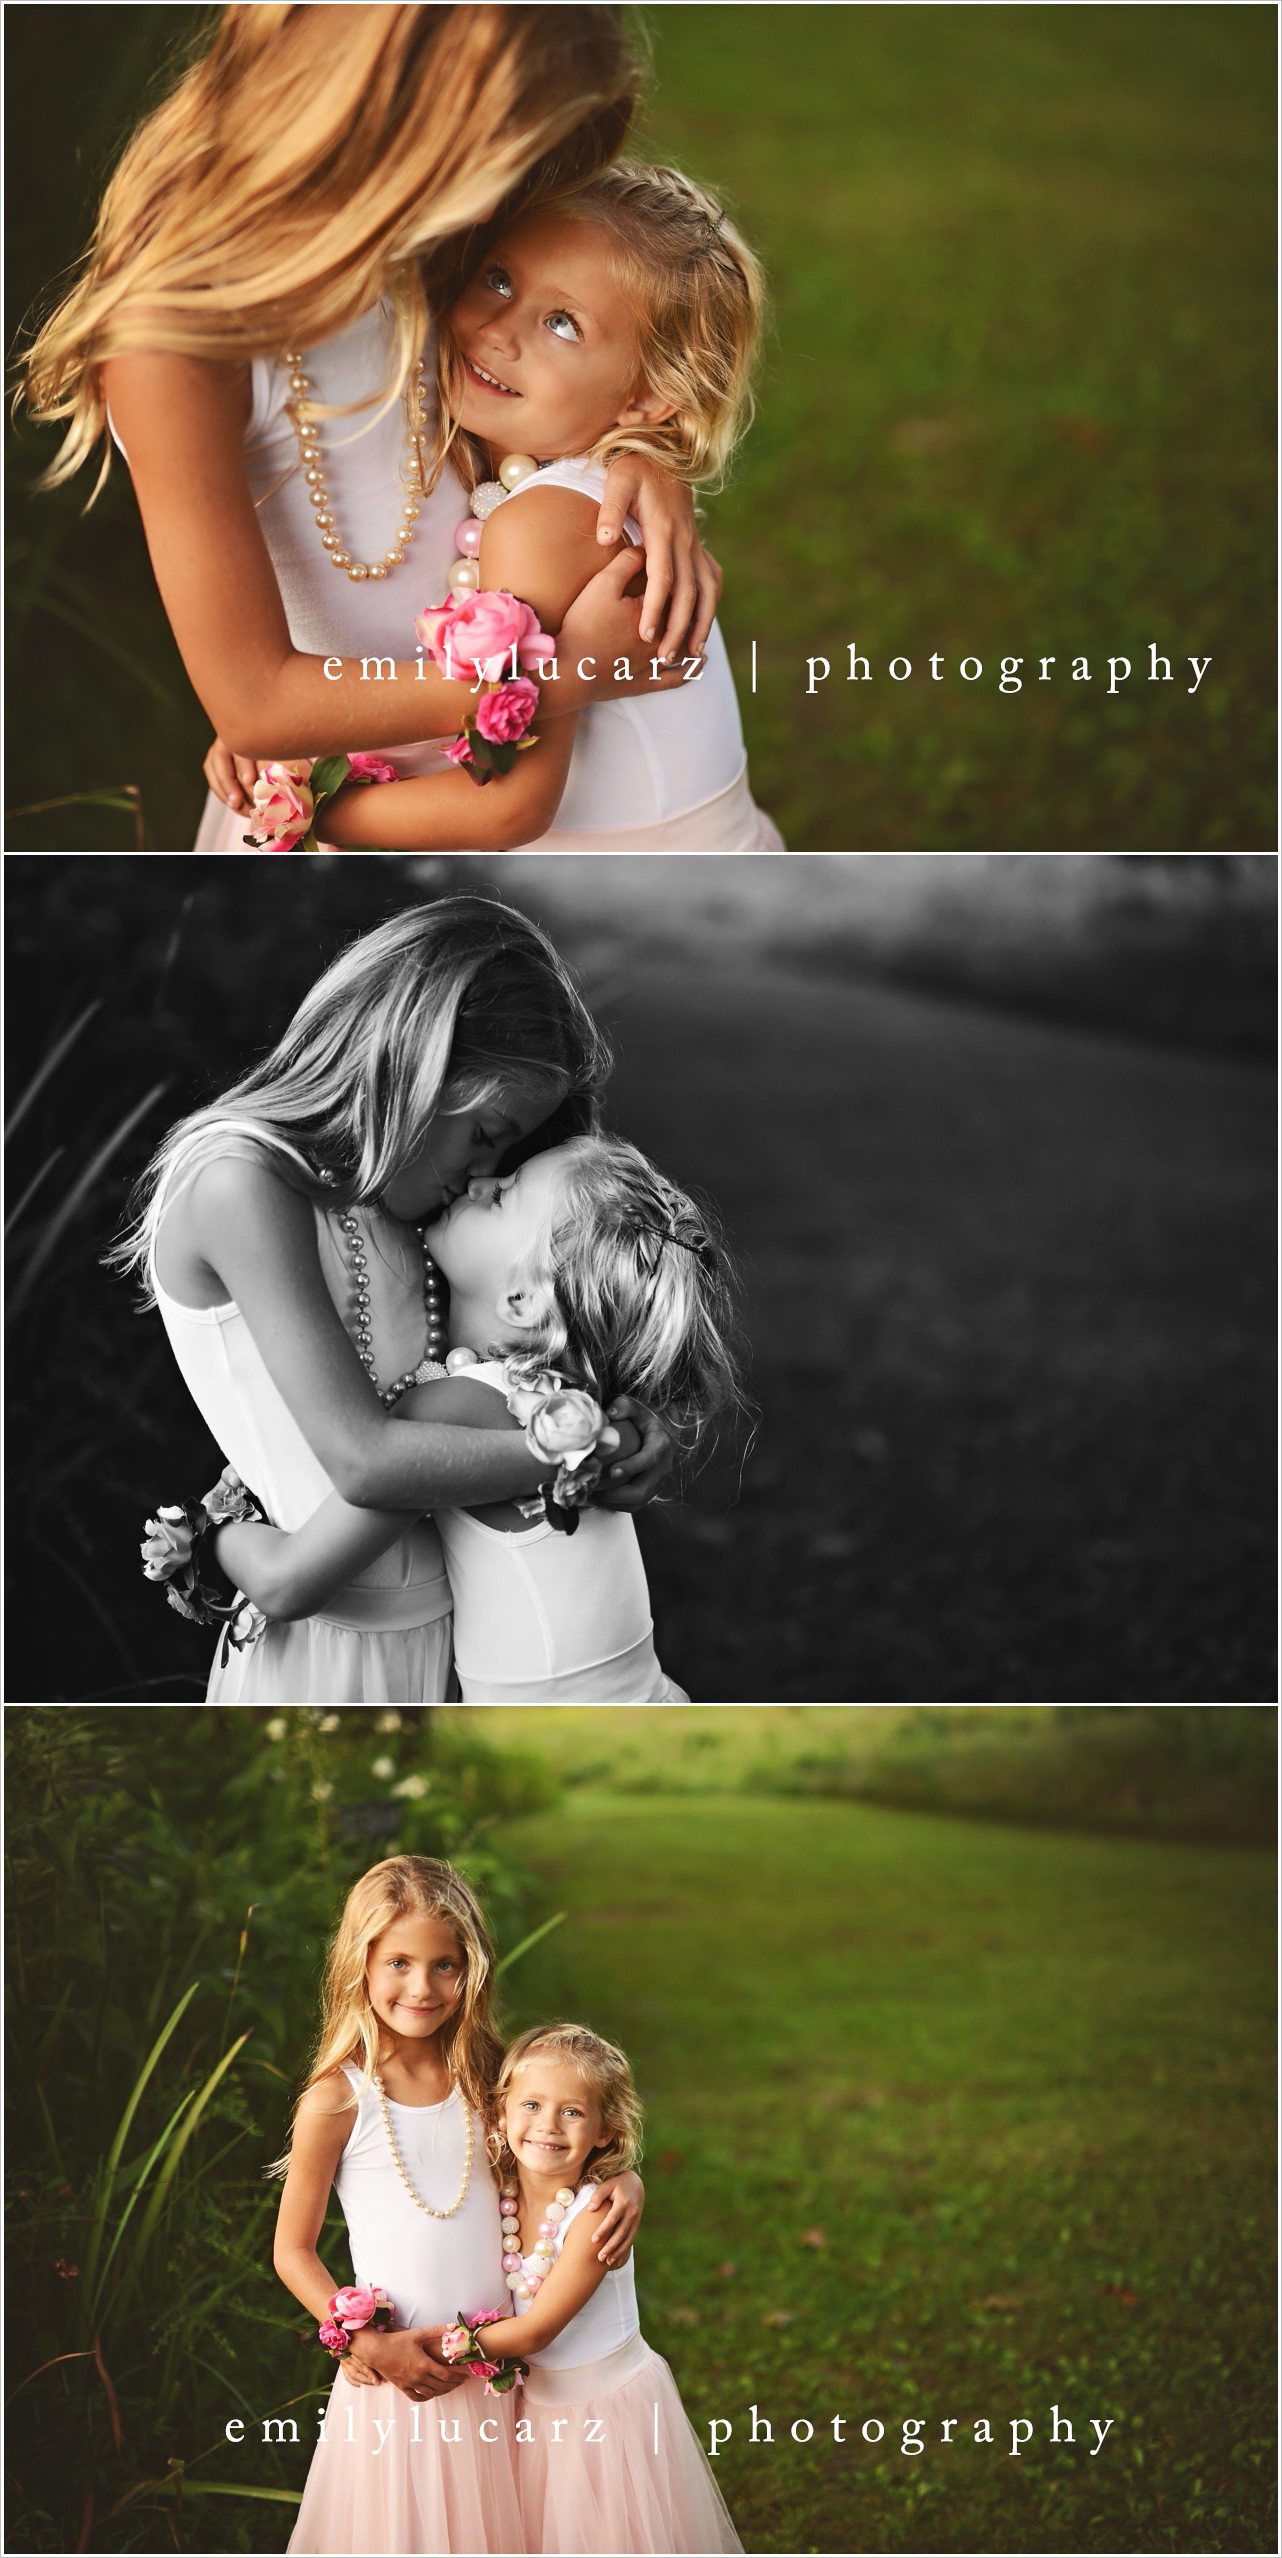 Family photo session in St. Louis Missouri